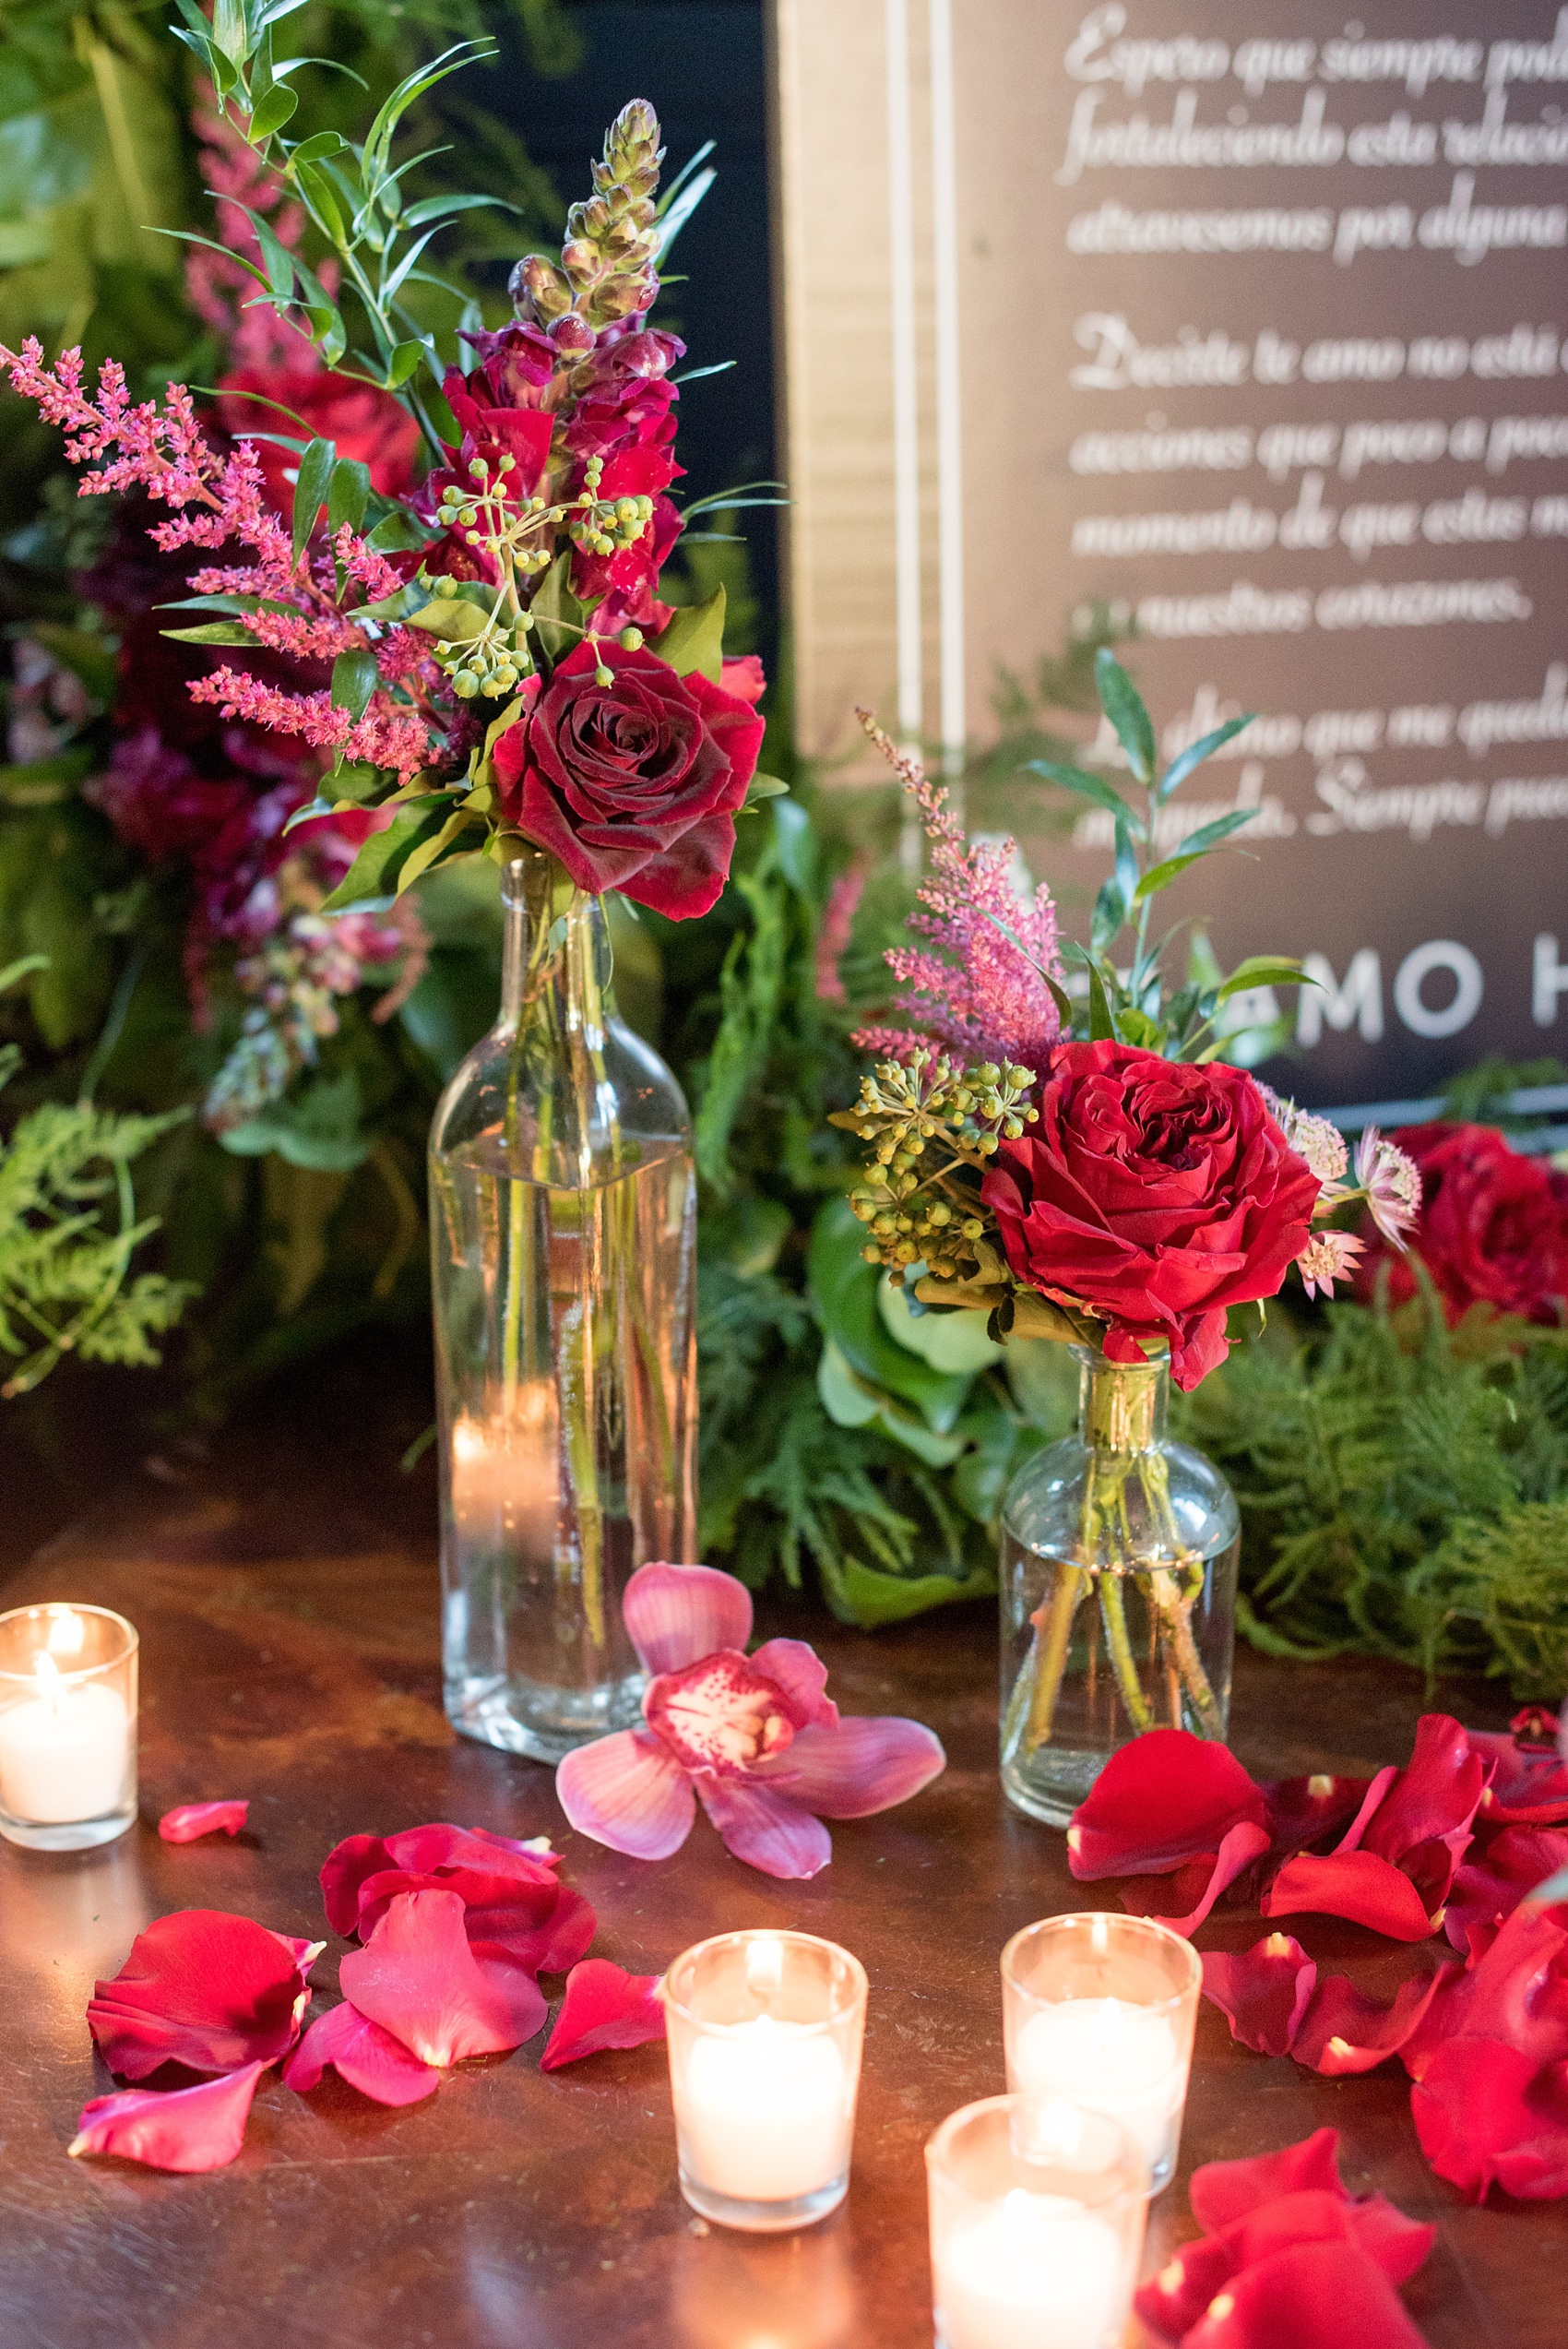 Mikkel Paige Photography photos of a NYC proposal at The Nomad Hotel. The Arrangement presented gorgeous red and pink flowers for a romantic candlelight proposal planned by Brilliant Event Planning.